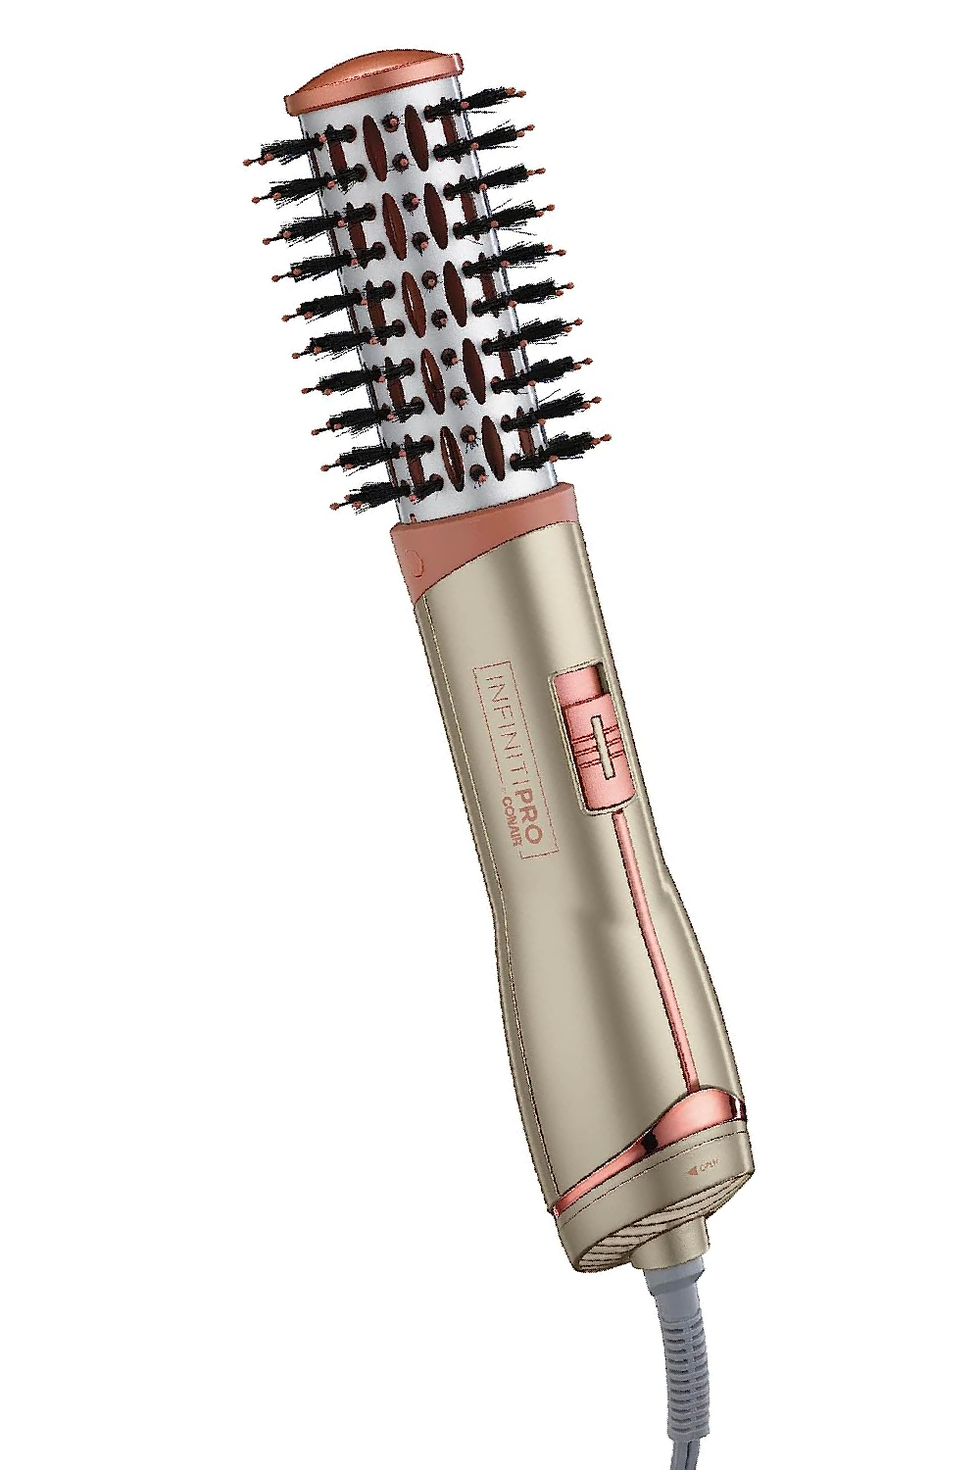 INFINITIPRO Frizz Free 1 1/2-inch Hot Air Brush